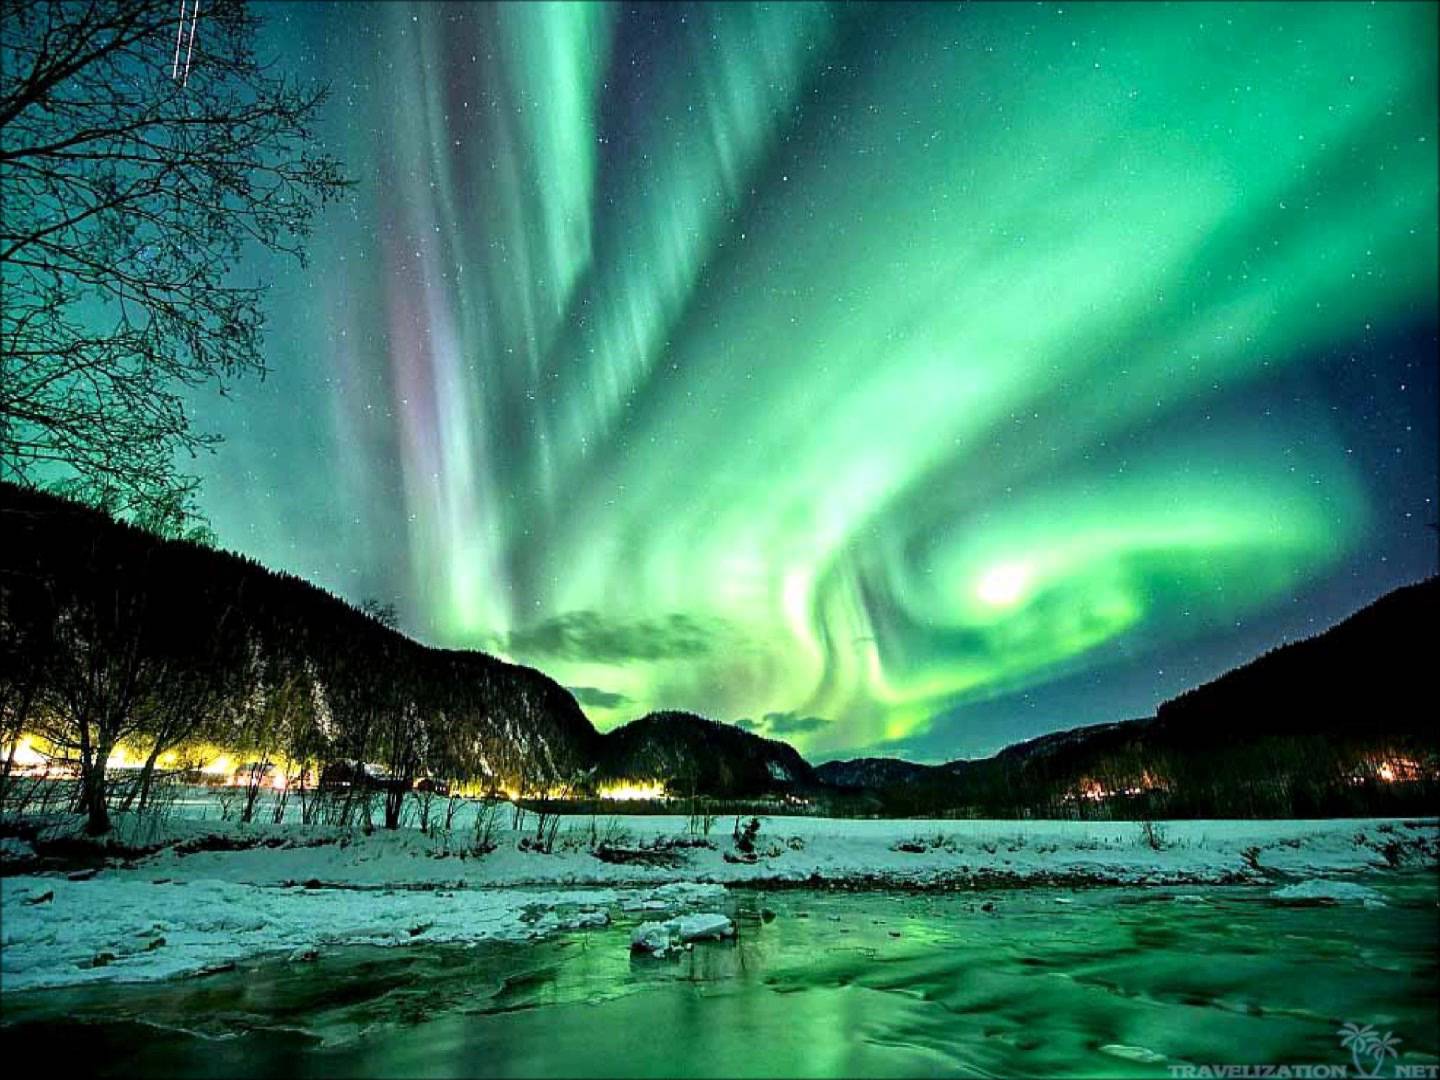 Rare Natural Phenomena, amazing world, Bioluminescence, Supercells, Volcanic Lightning, Snow Donuts, Fire Rainbows, Lenticular Clouds, Auroras, Fire Whirls, Finnish Lapland, Sun Dogs, Skypunch, Frost Flowers, Columnar Basalt, Penitentes, Light Poles, Morning Glory Clouds, Waterspouts, Mammatus Clouds, The Hessdalen Light, Brinicles, Earthquake Lights, Ball Lightning, most amazing natural phenomenon in the world, top 10 most amazing natural phenomenon in the world, unbelievable natural phenomenon, amazing natural events, natural phenomena, water phenomenons, rare phenomenon in nature, rare events, Mysterious world, bizzare world, most amazing Places, Incredible